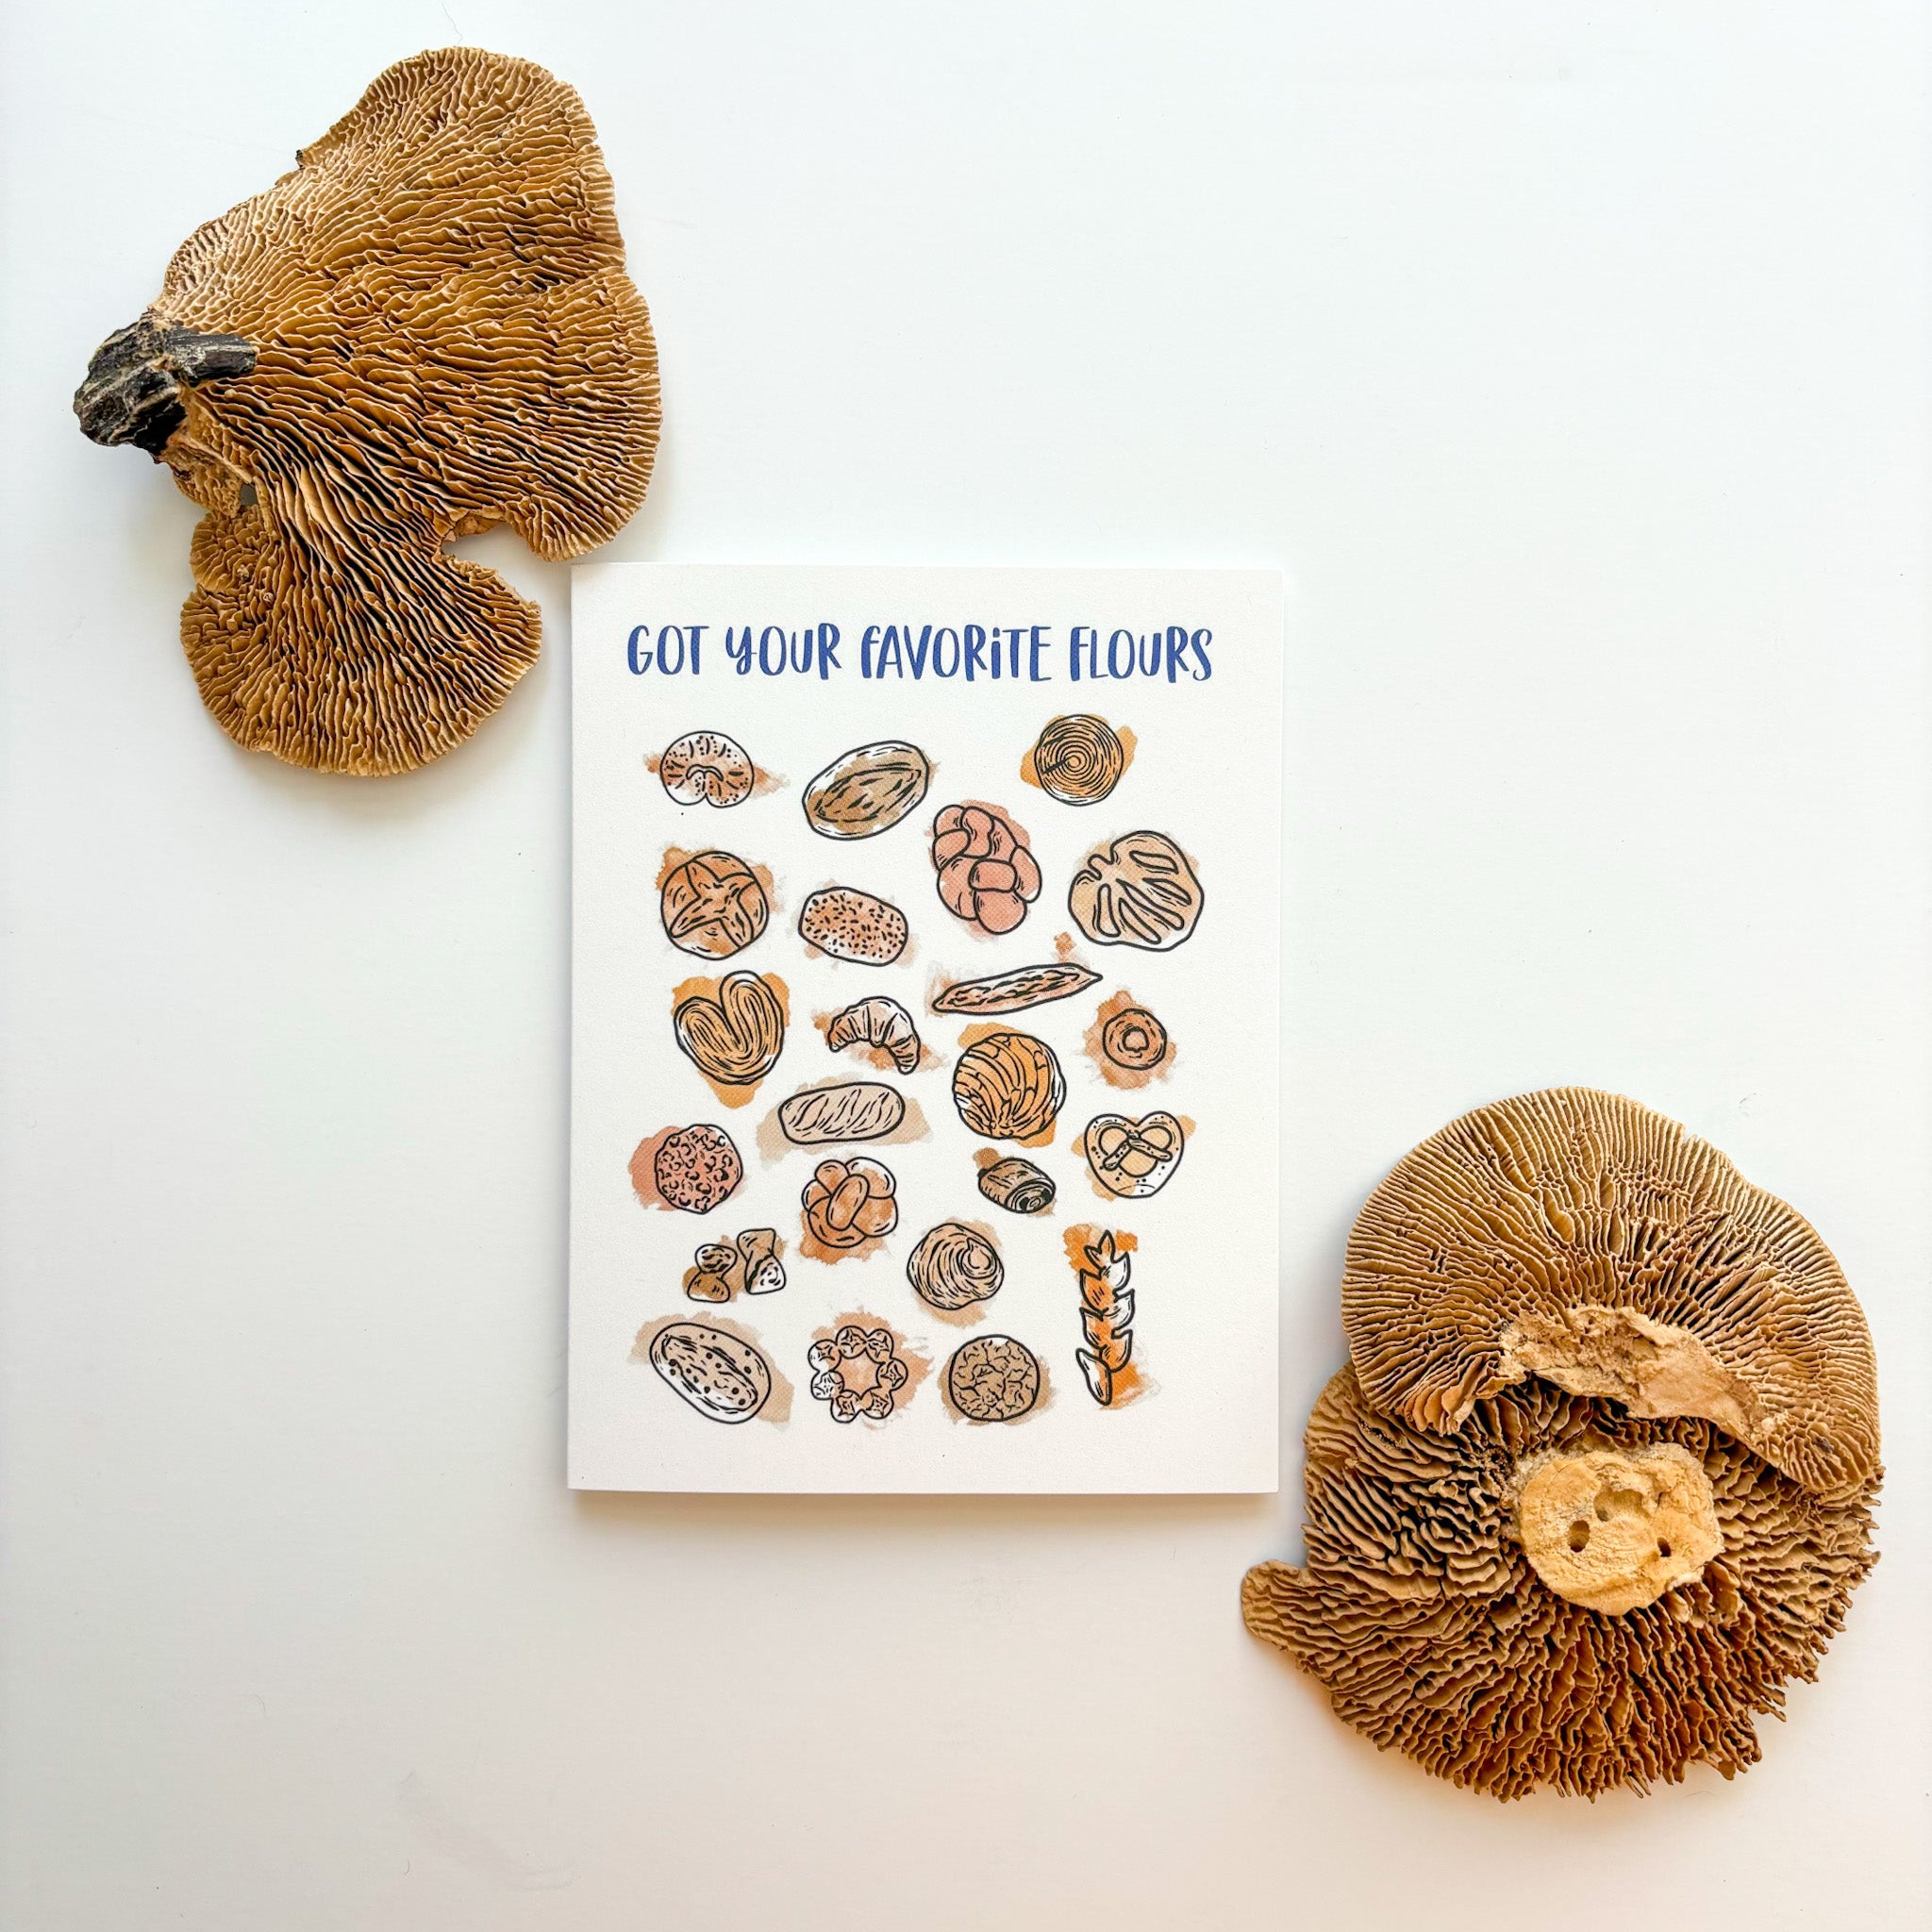 Mother’s Day Mushrooms Greeting Card